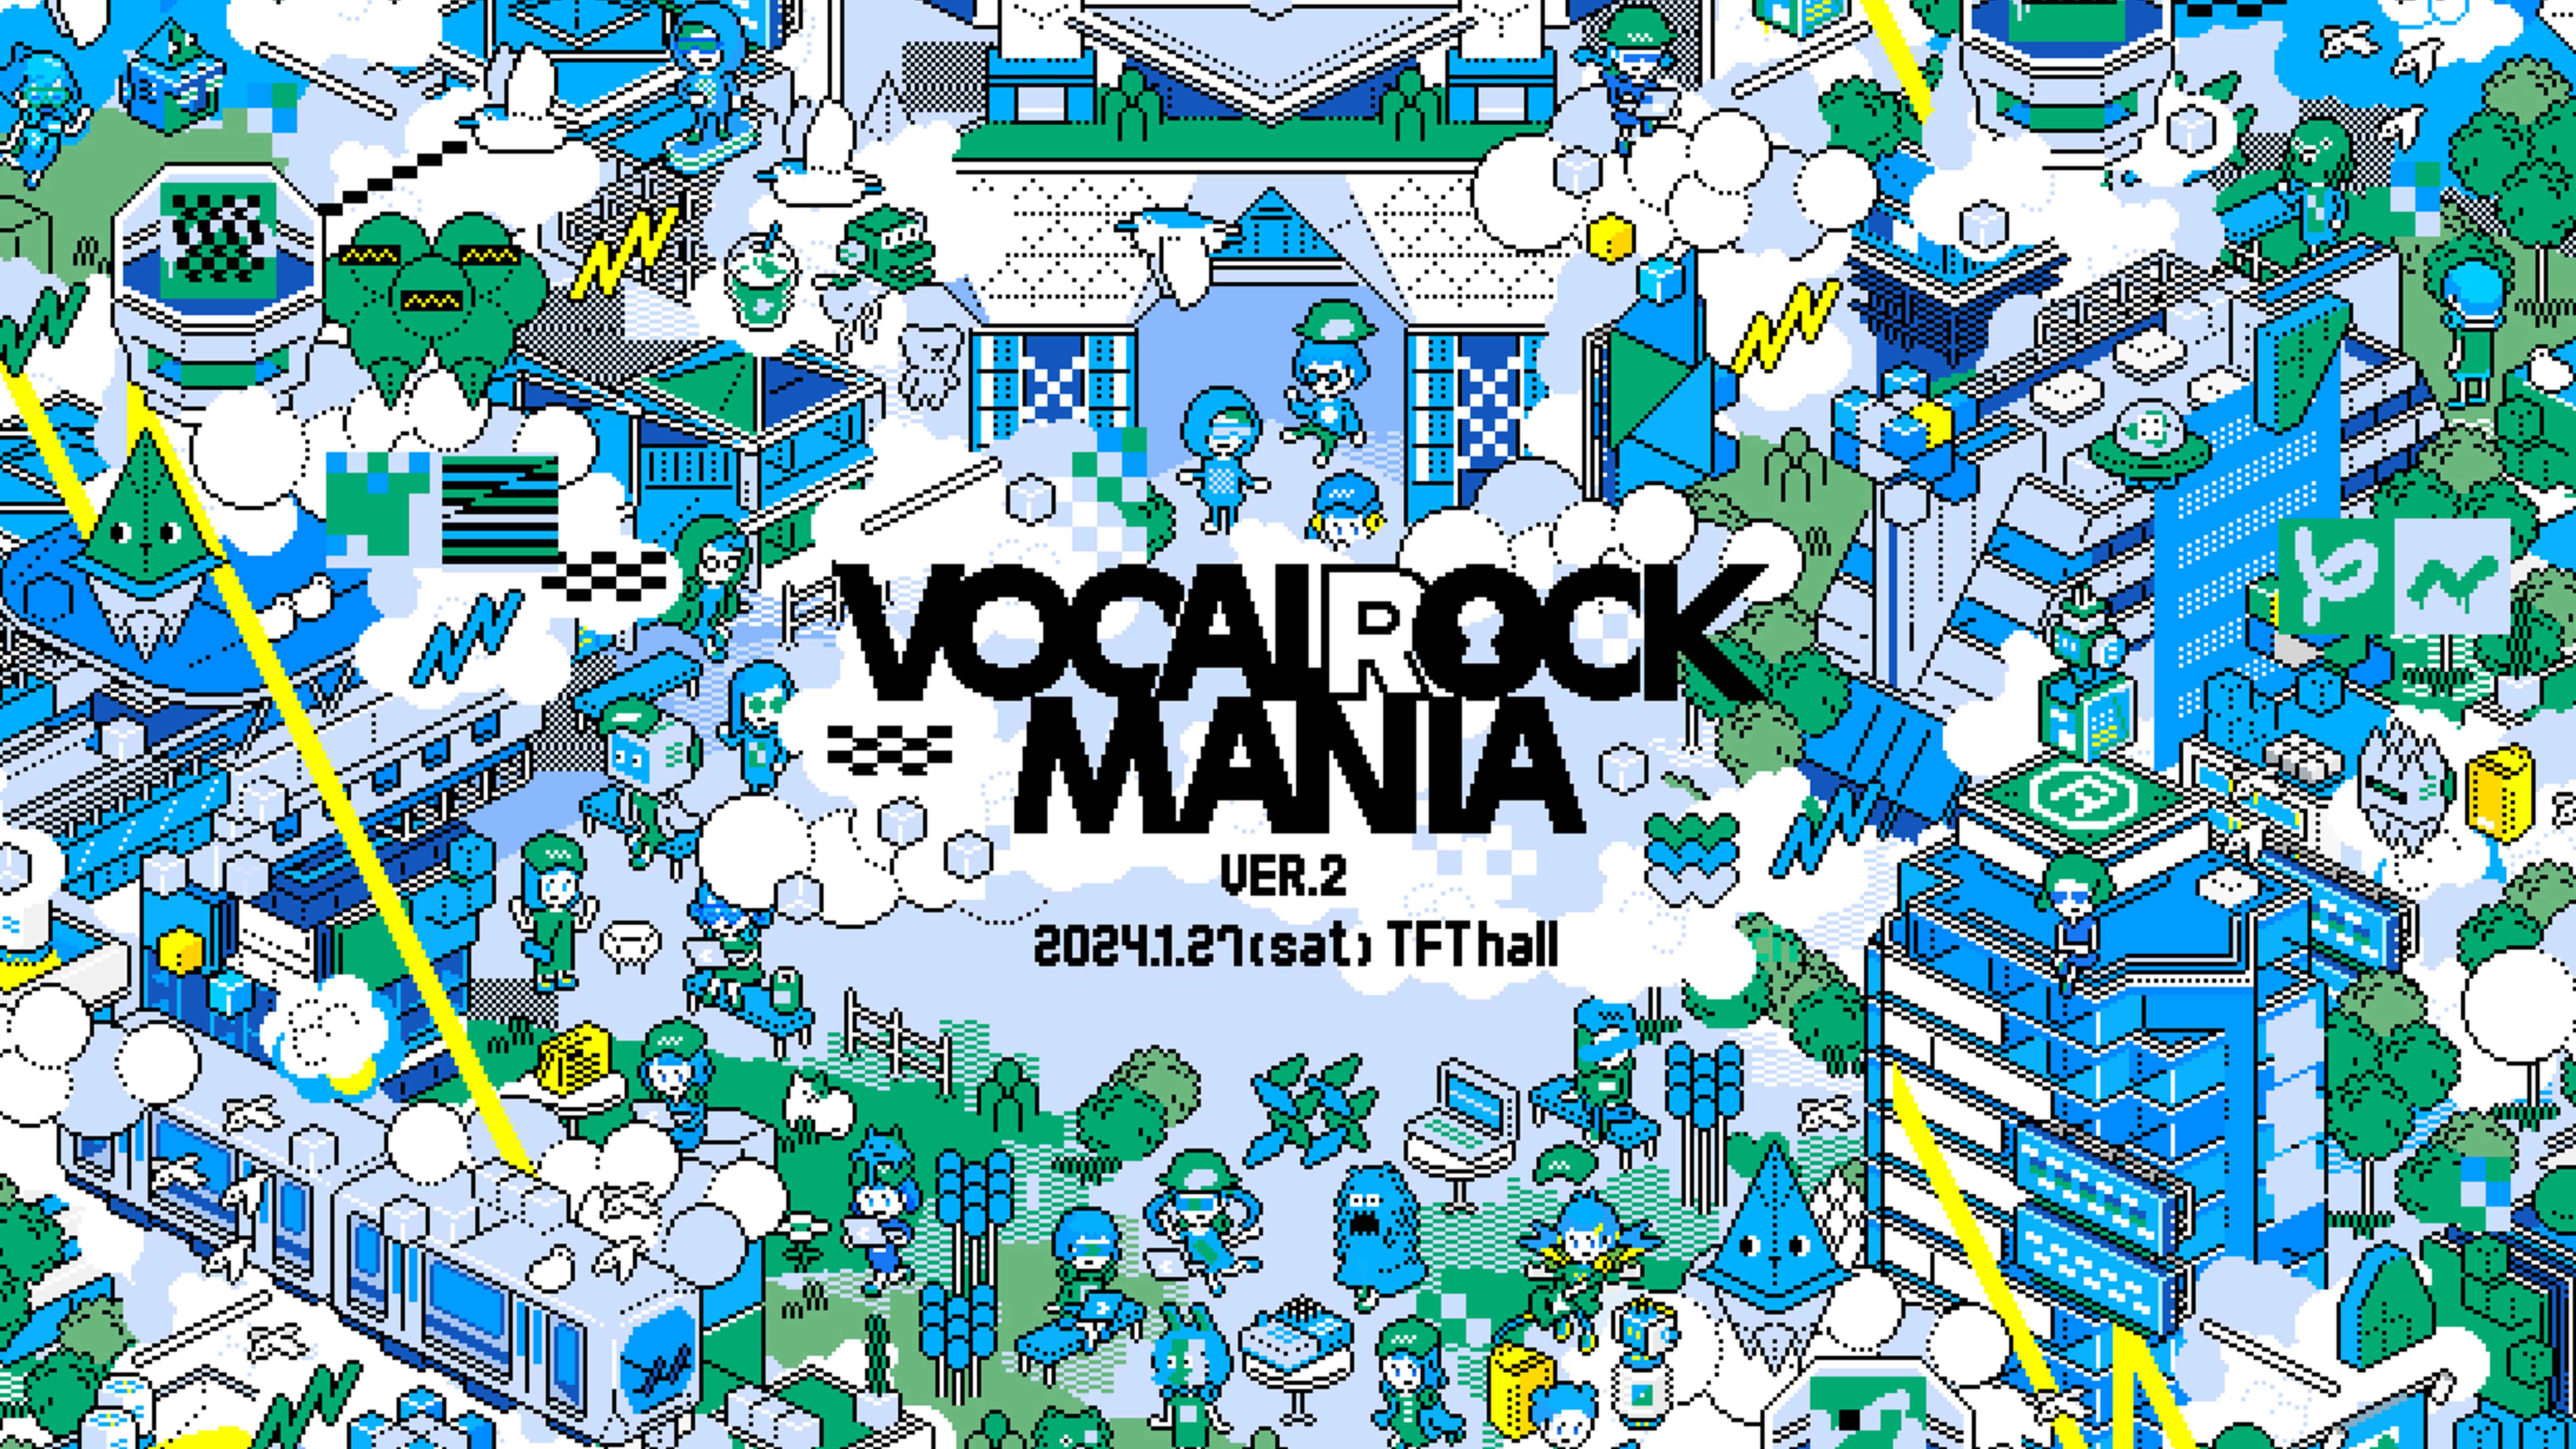 「VOCALOCK MANIA ver.2」にPuzzle Project参加アーティストの出演決定！